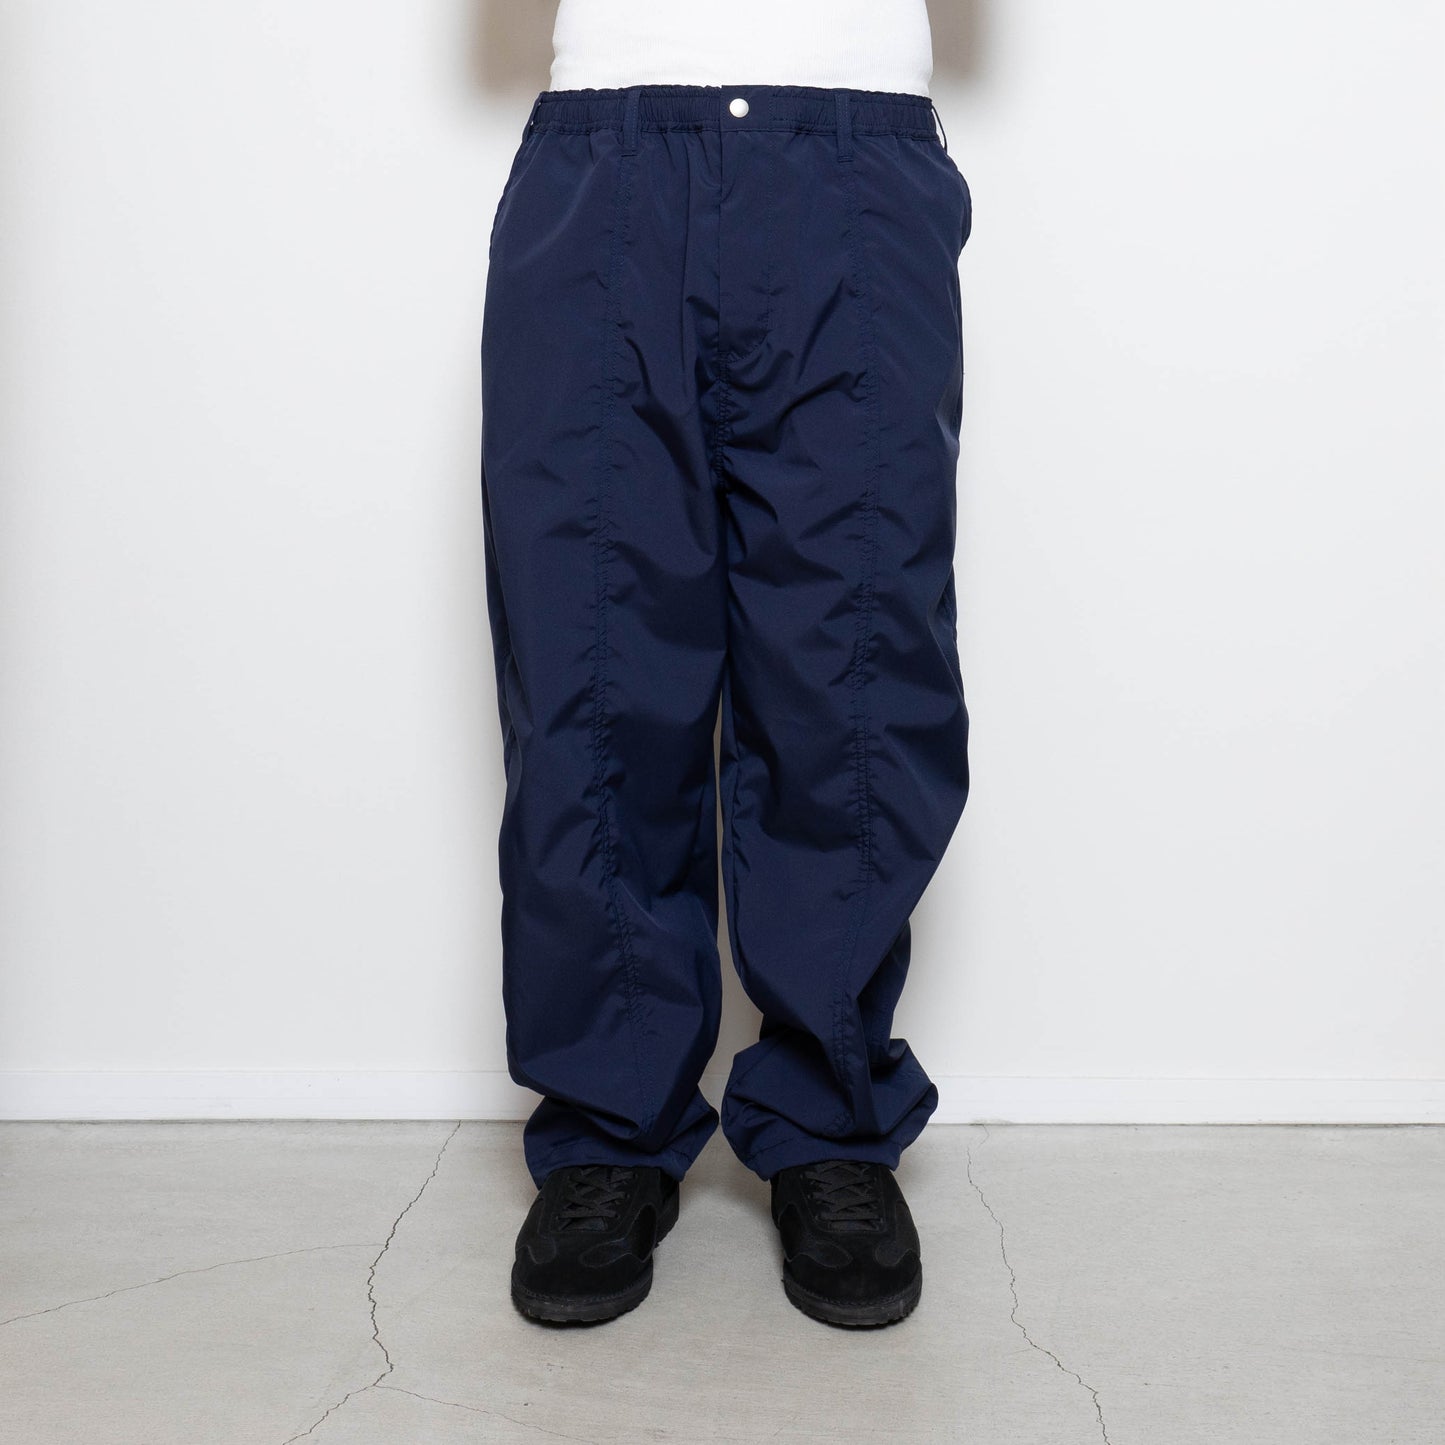 Solotex Baggy Pants - Toupe